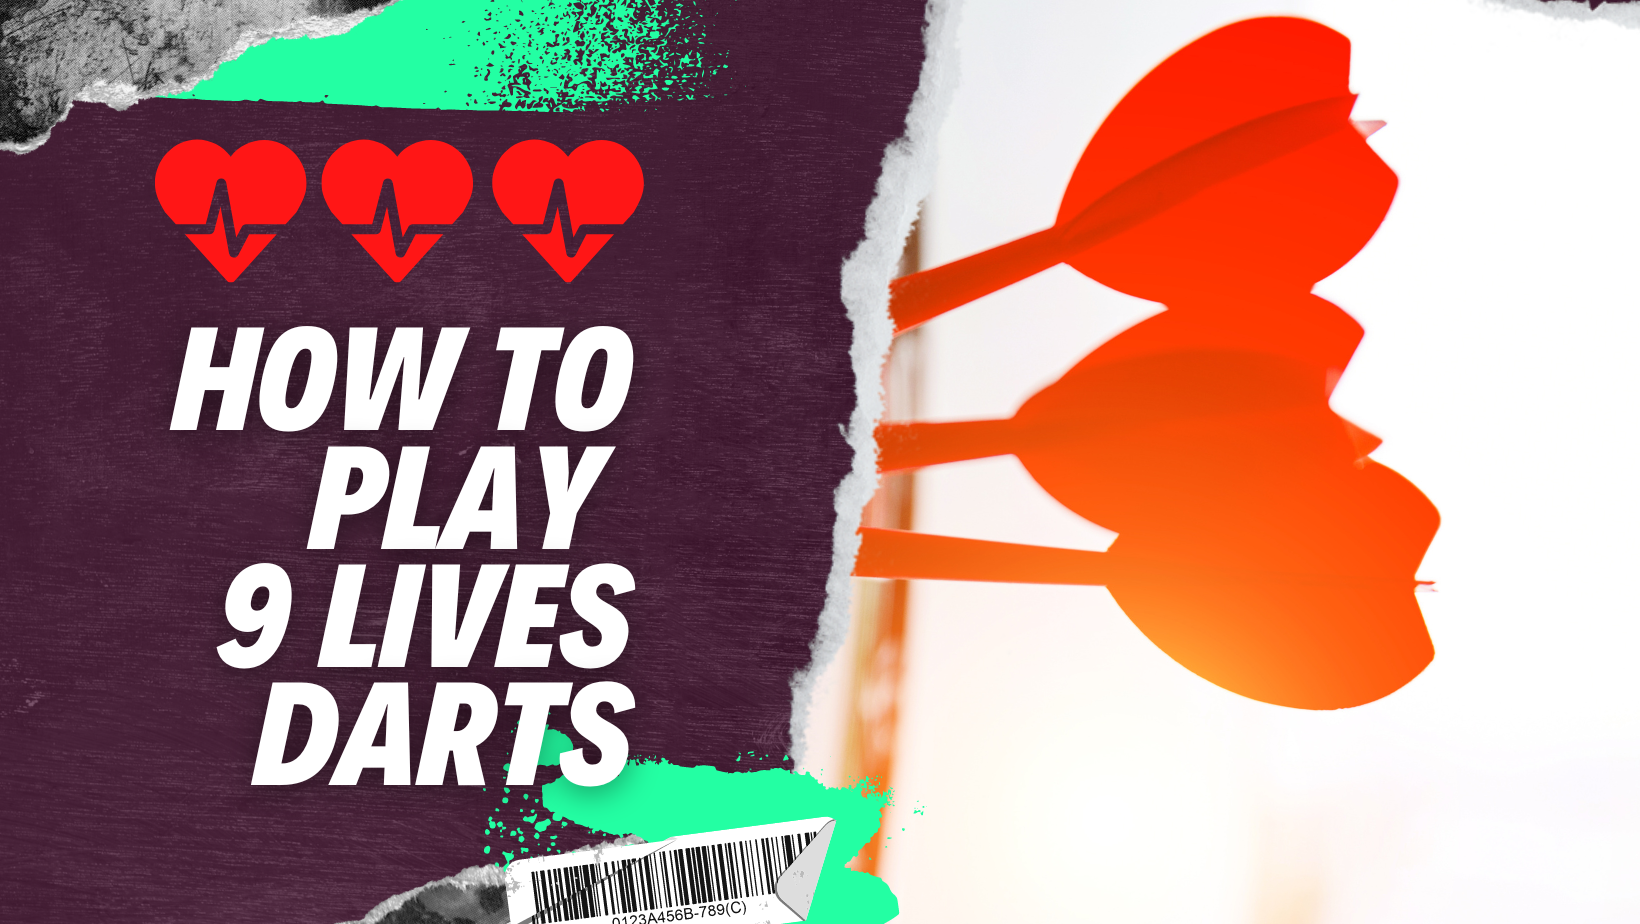 How to play 9 Lives darts